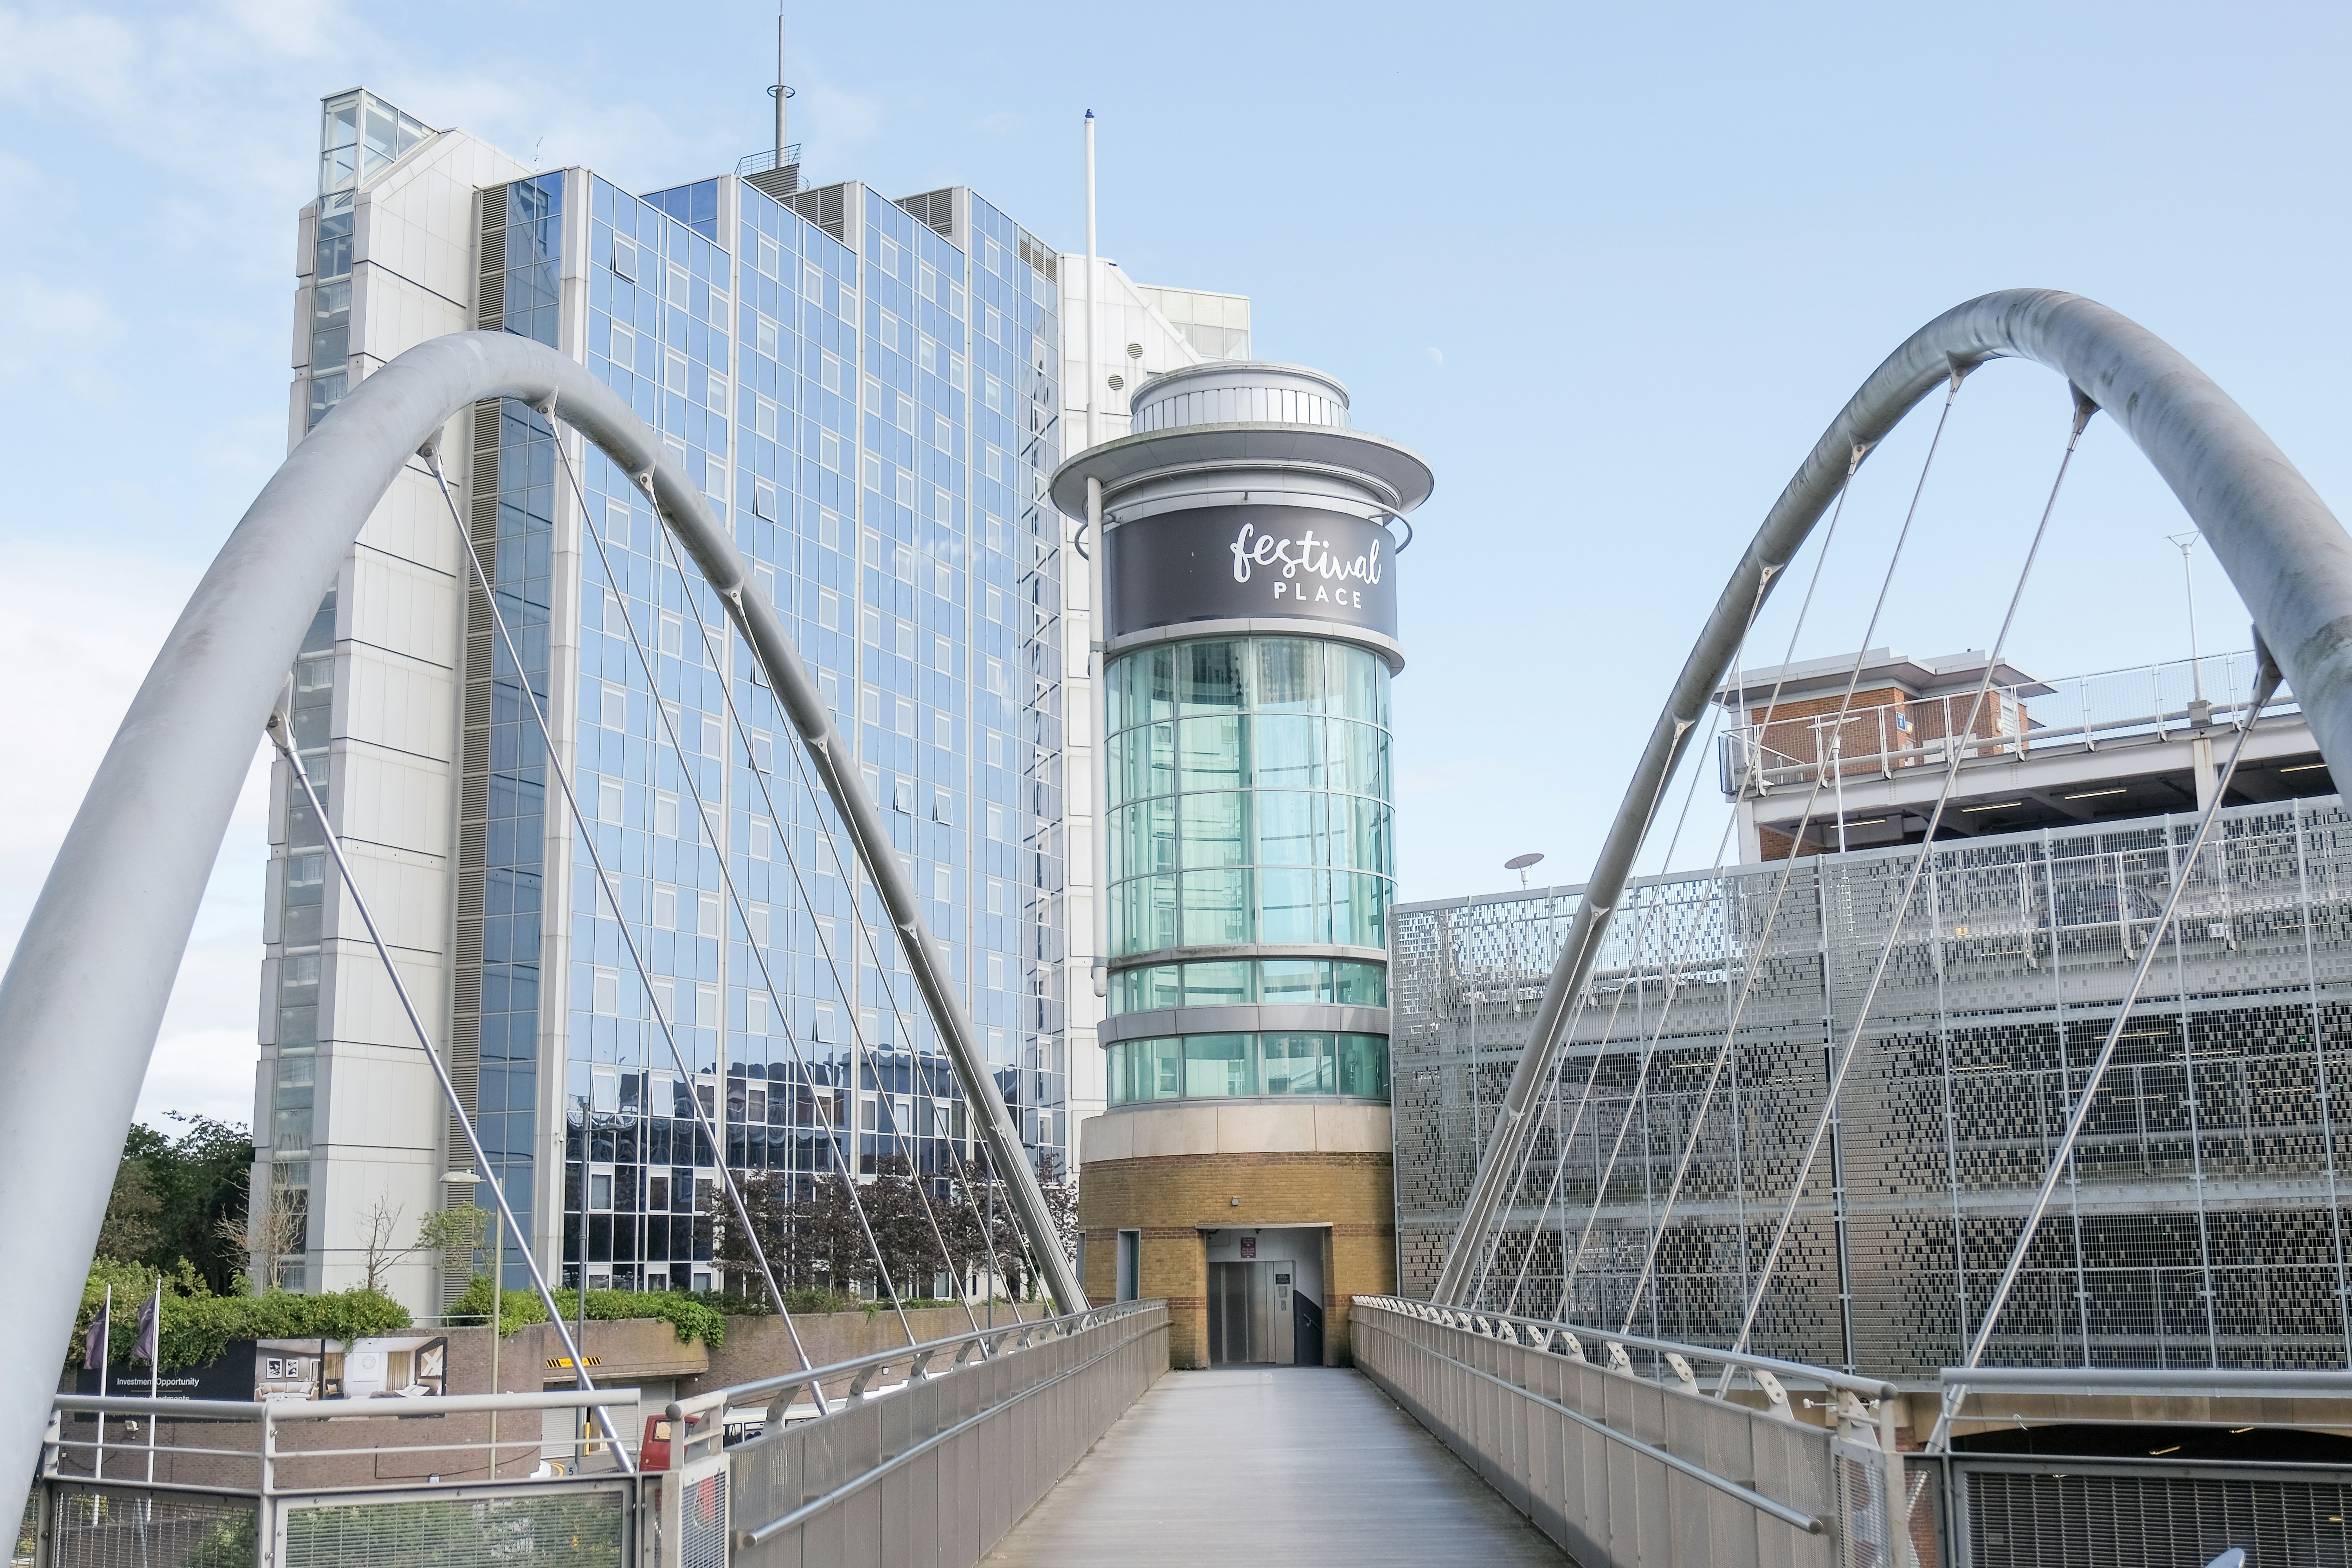 A bridge with Festival Place tower at the end. In the background is an office block and the car park